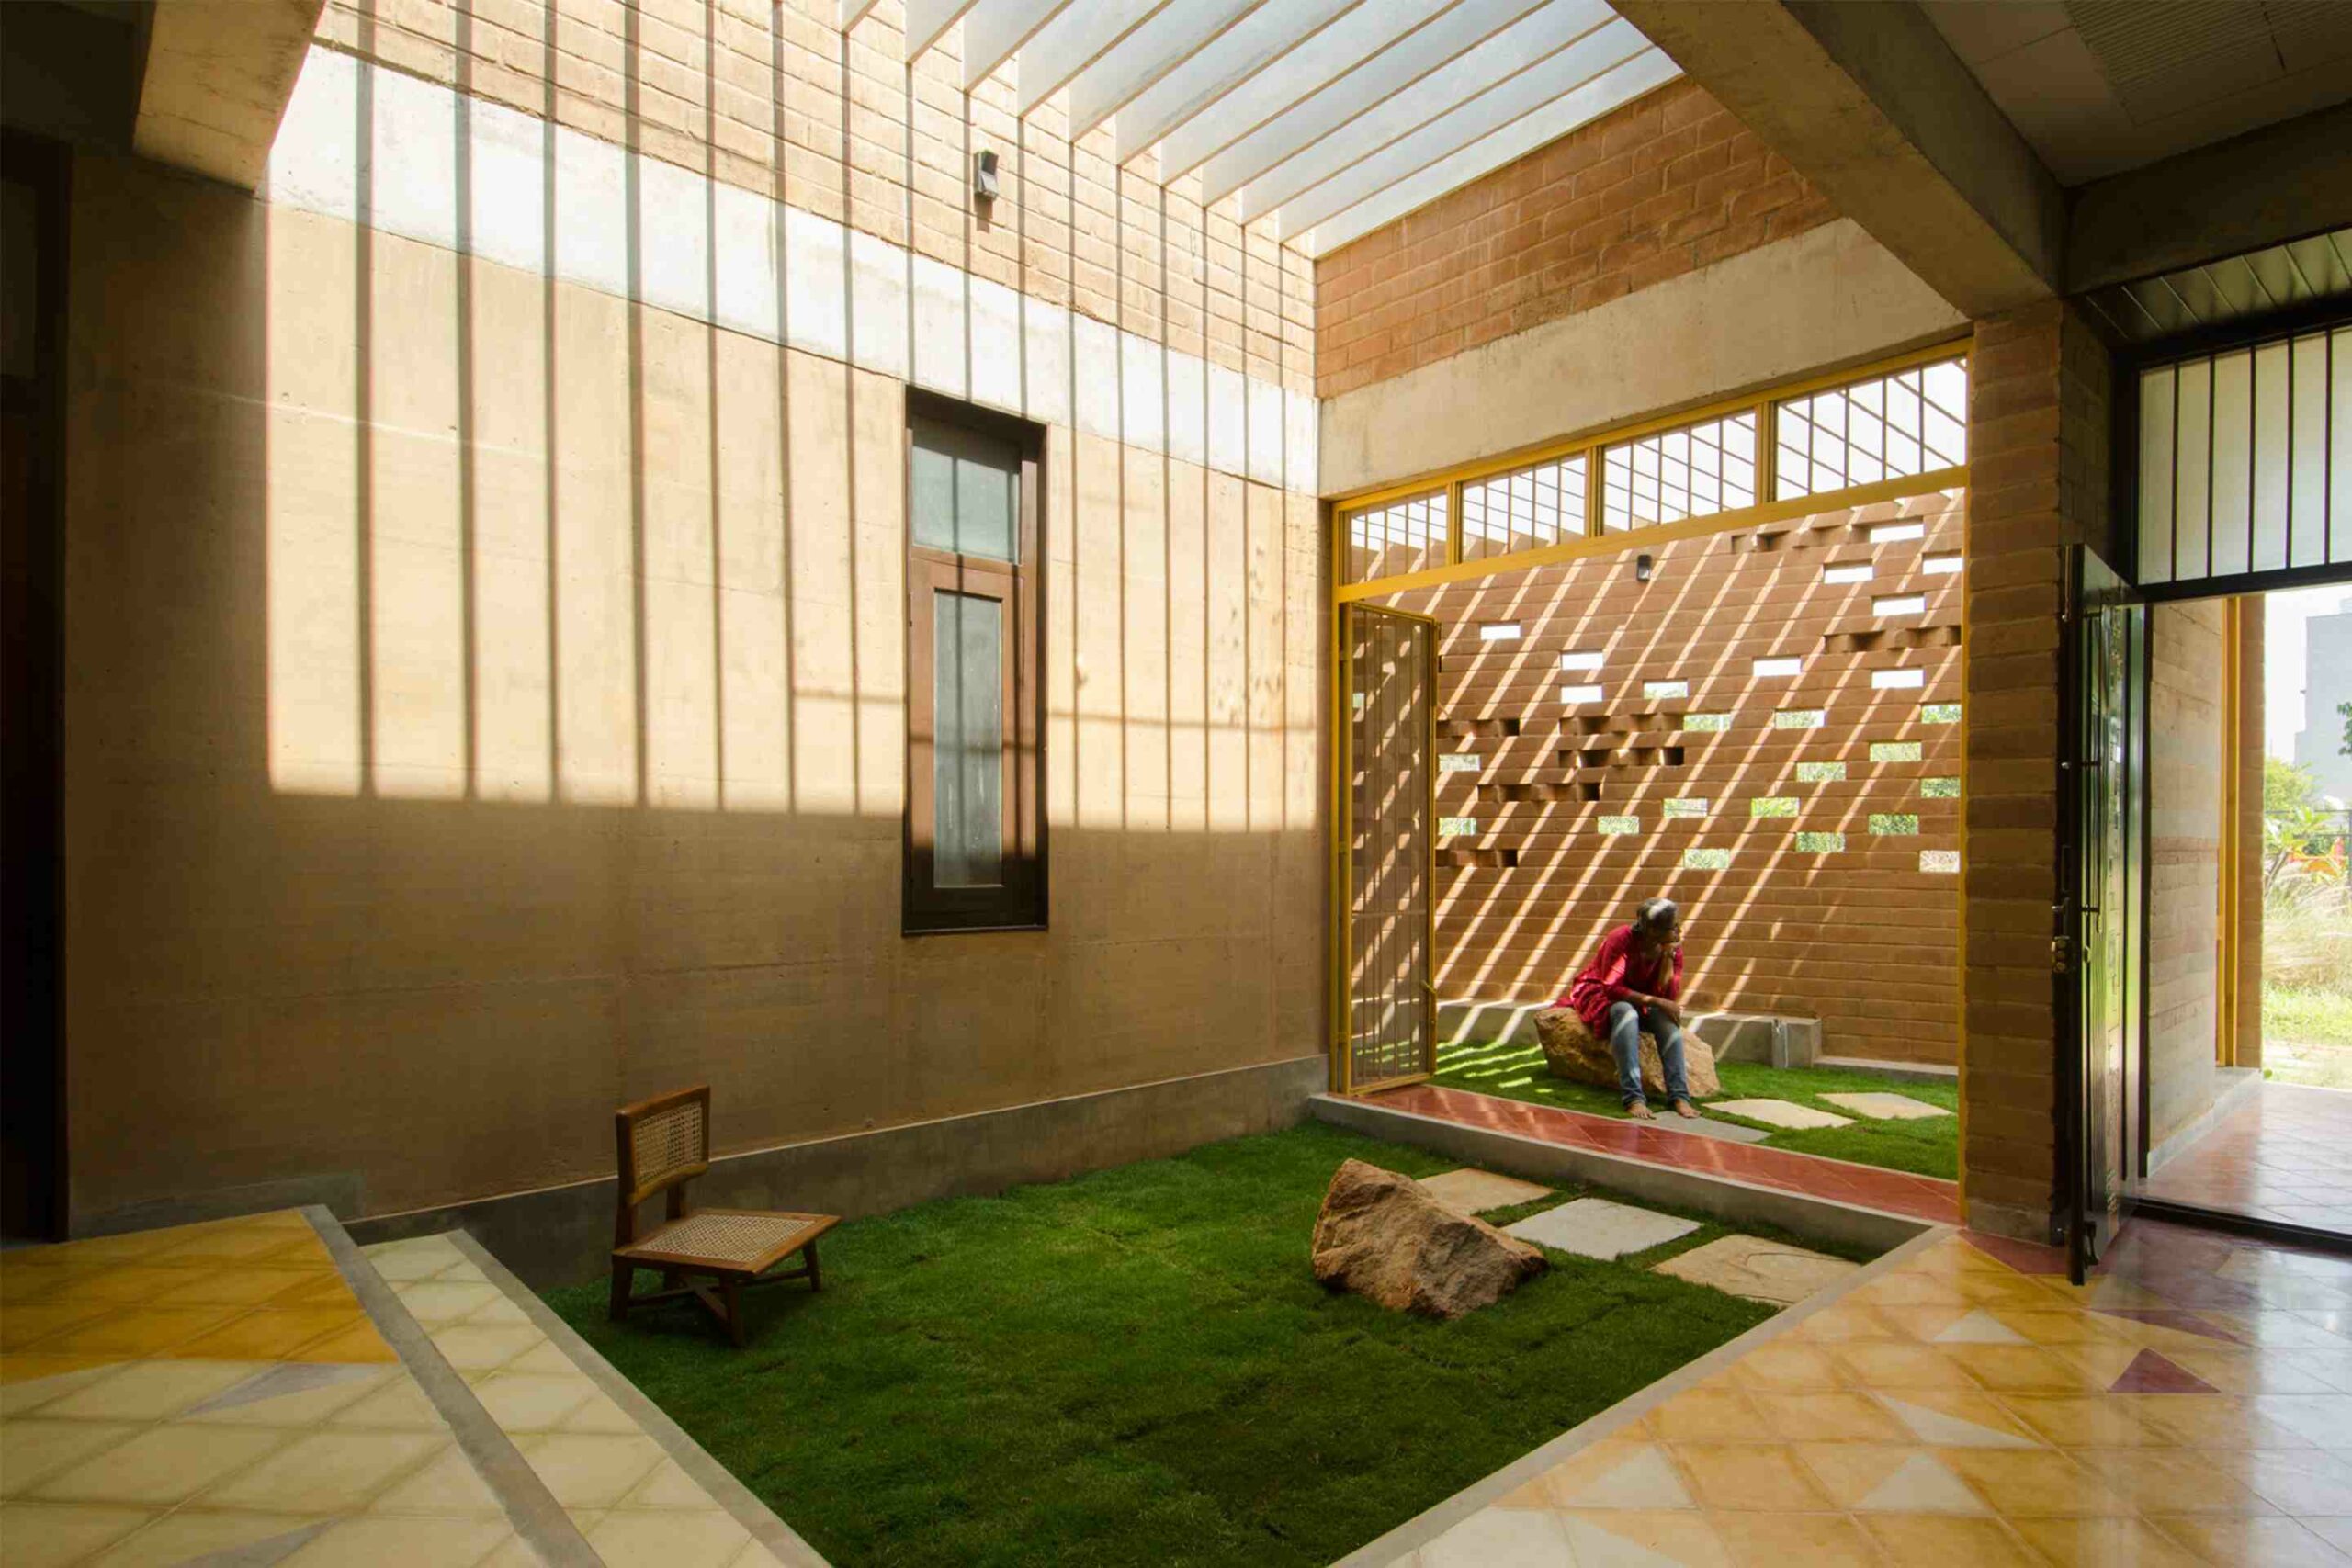 The courtyard of the home has jaali (mesh) walls that allow the sunlight to percolate